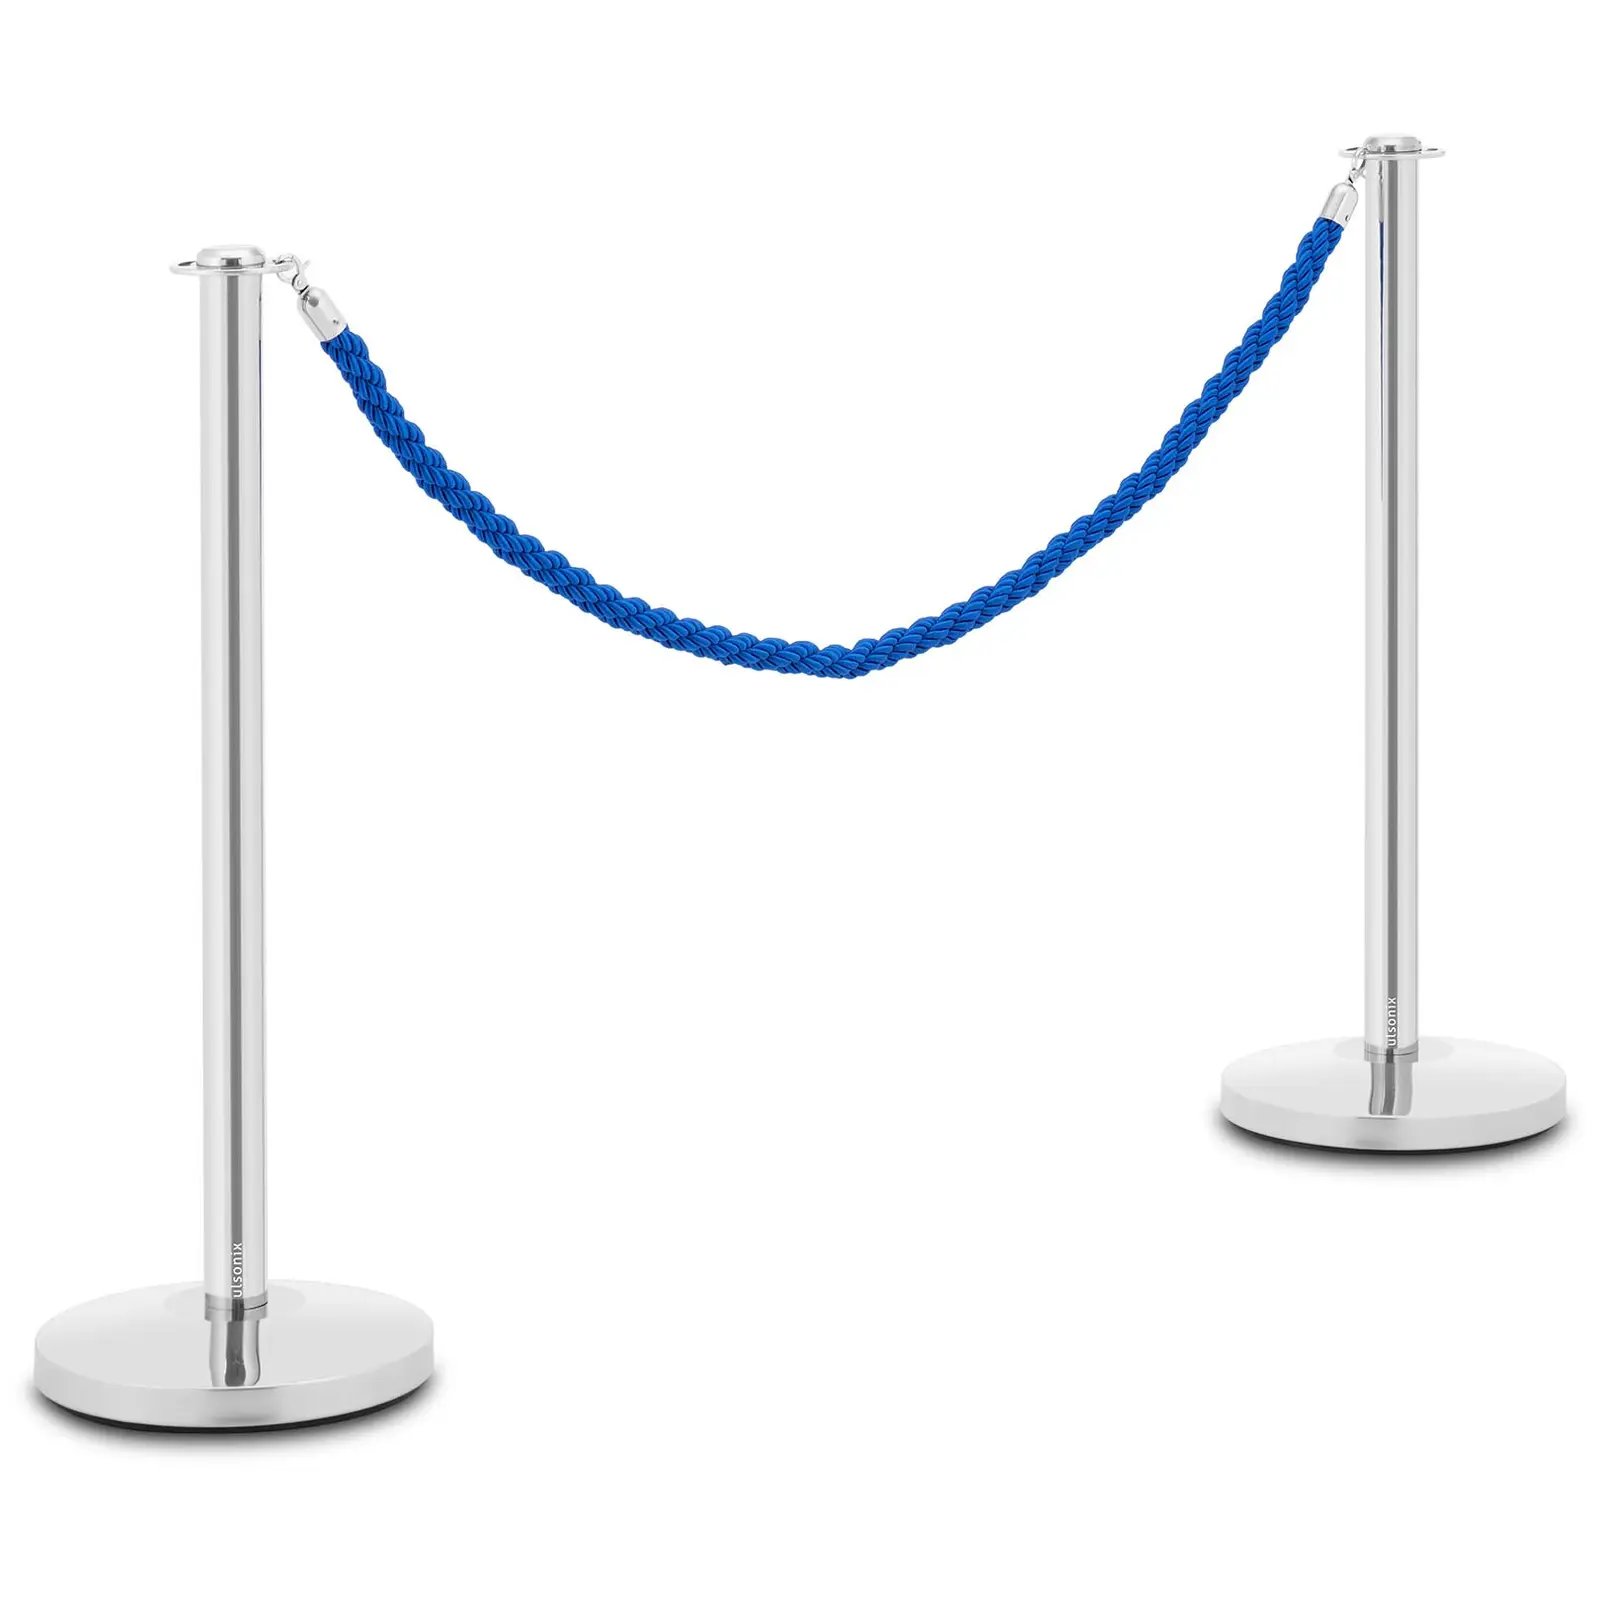 2 Barrier Posts - with barrier rope - 150 cm - silver coloured - flat head